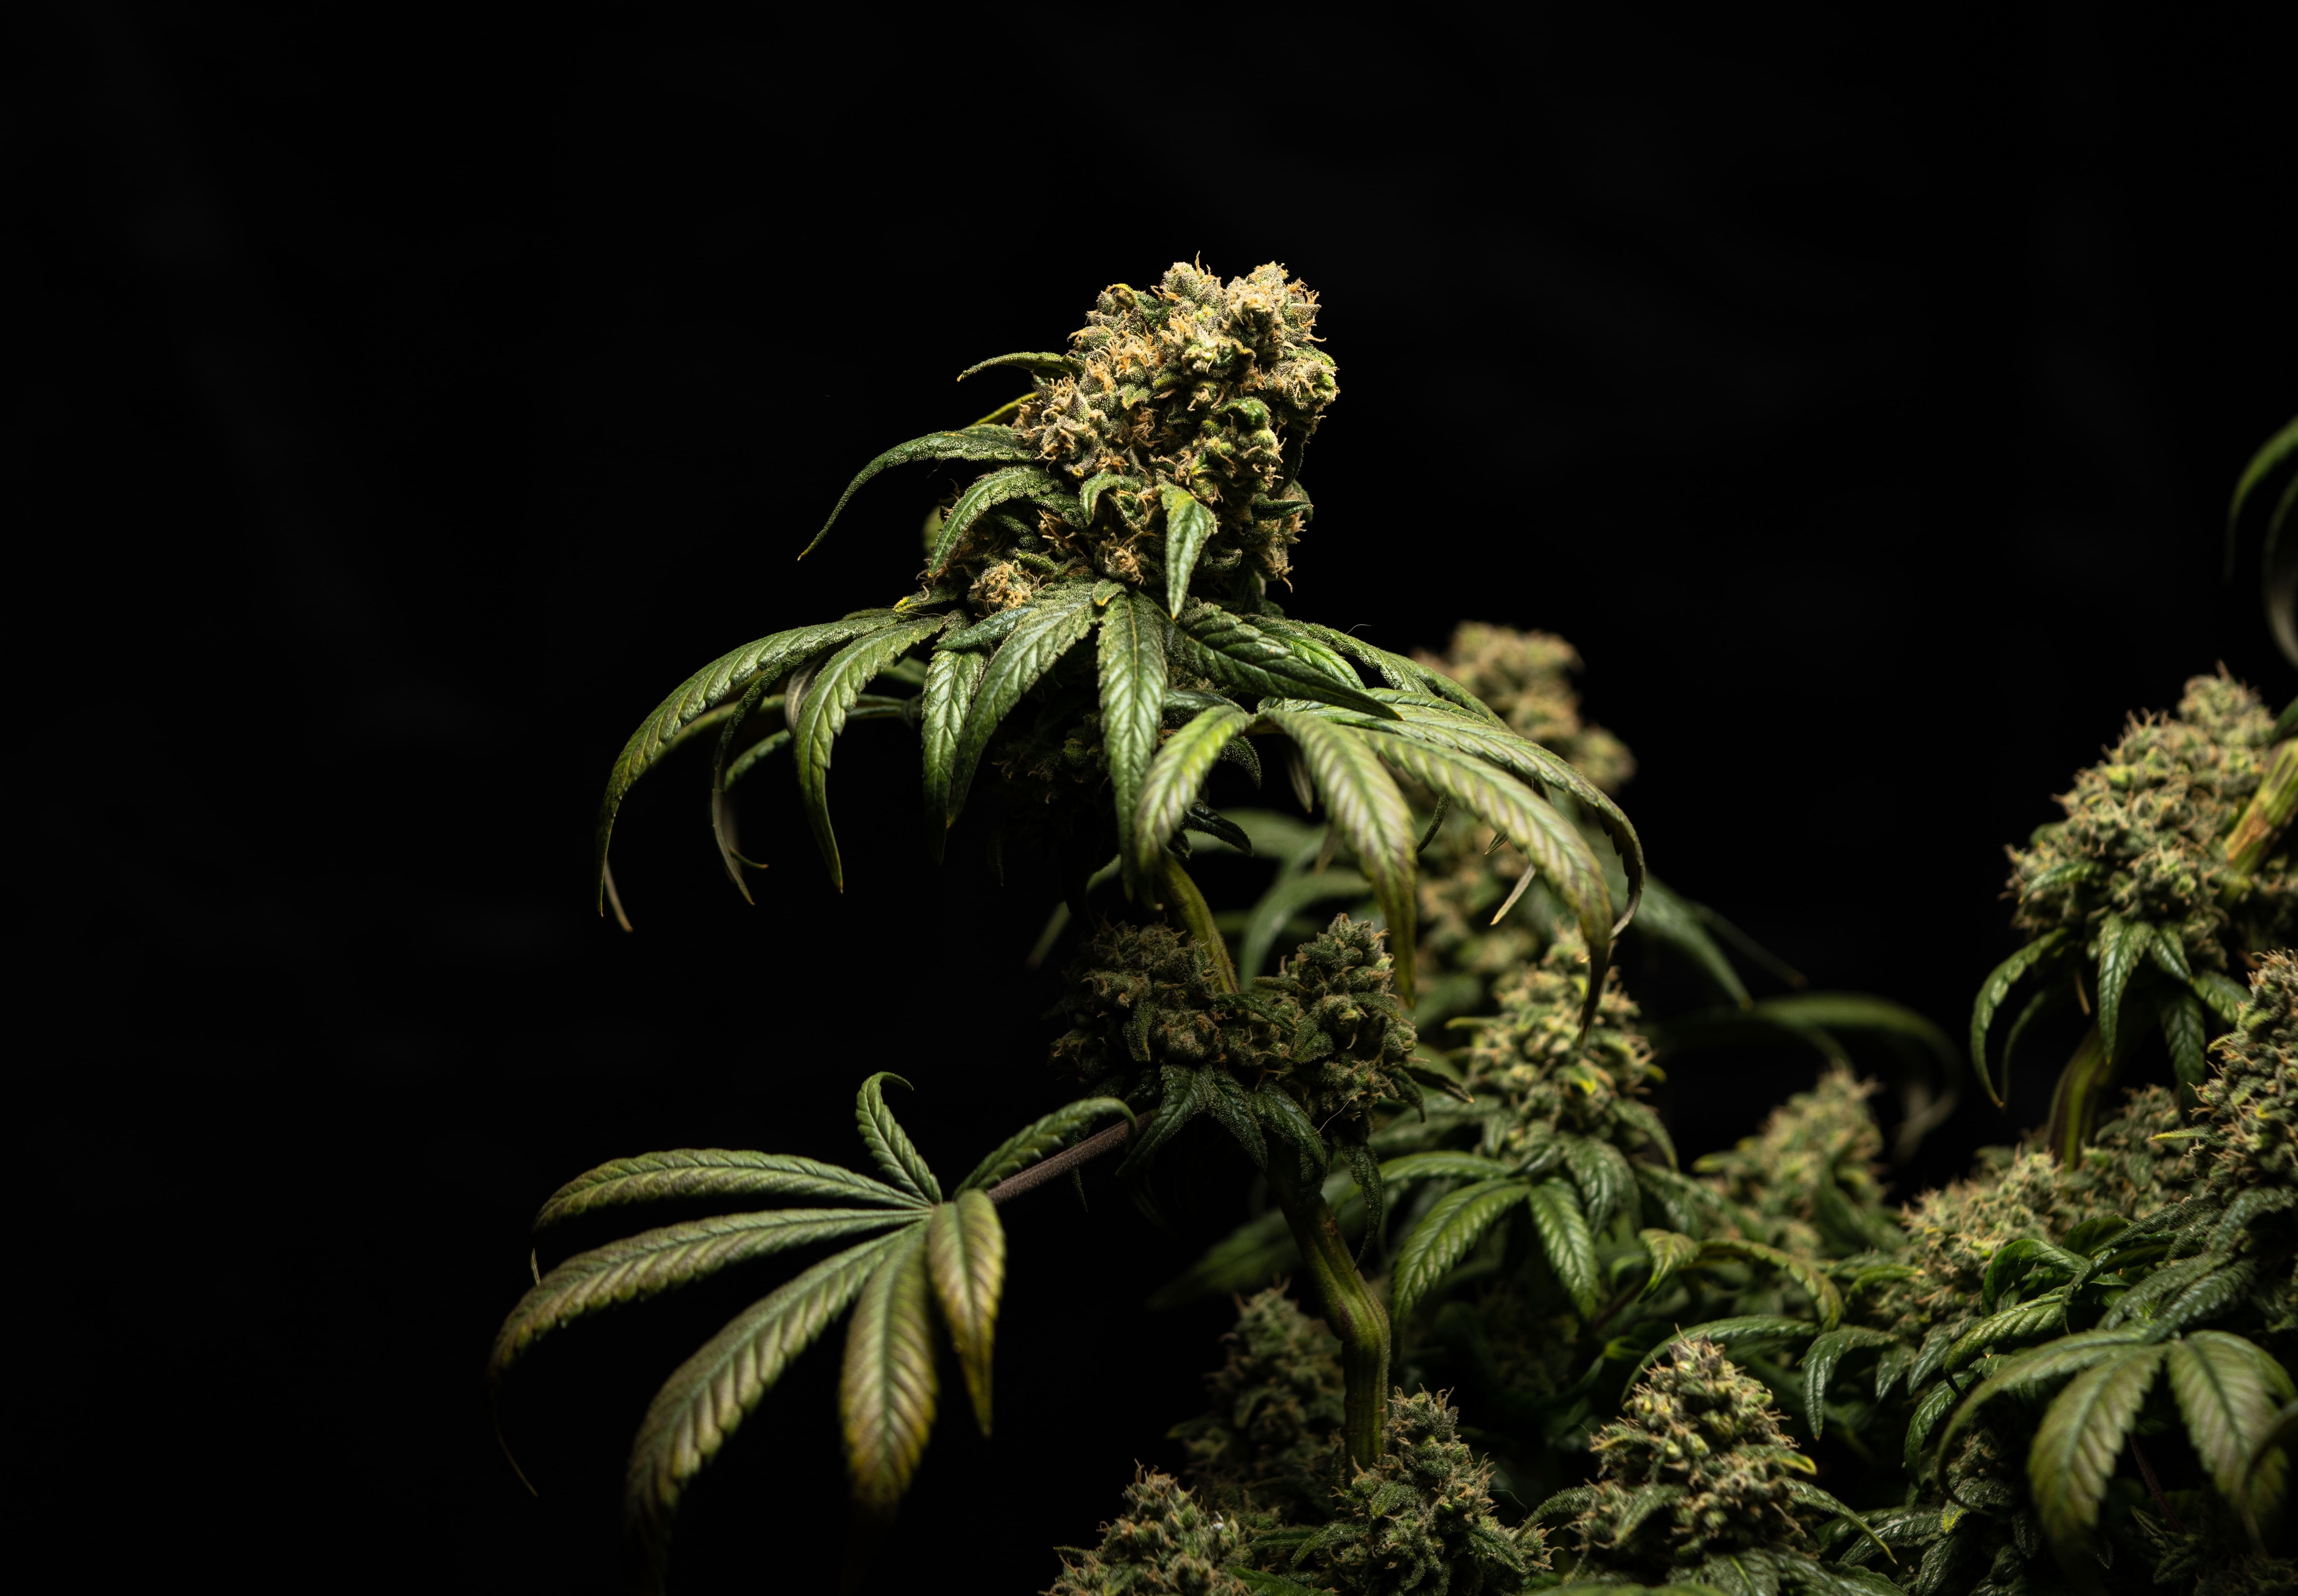 Image of a cannabis plant against a black background